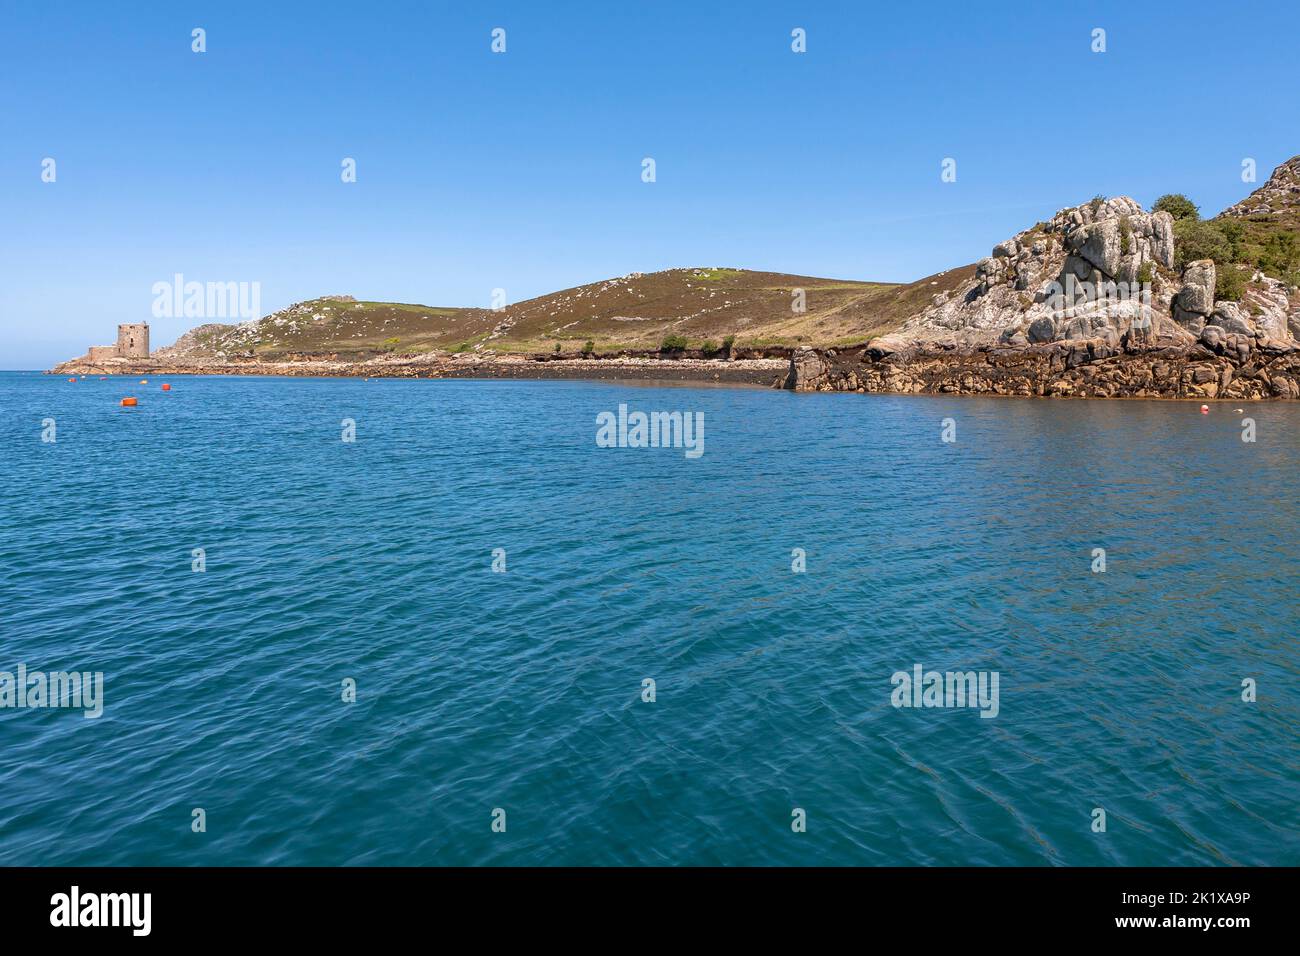 Cromwell's Castle on the island of Tresco, from New Grimsby Sound between Tresco and Bryher, Isles of Scilly, UK on a calm Summer's day. Stock Photo